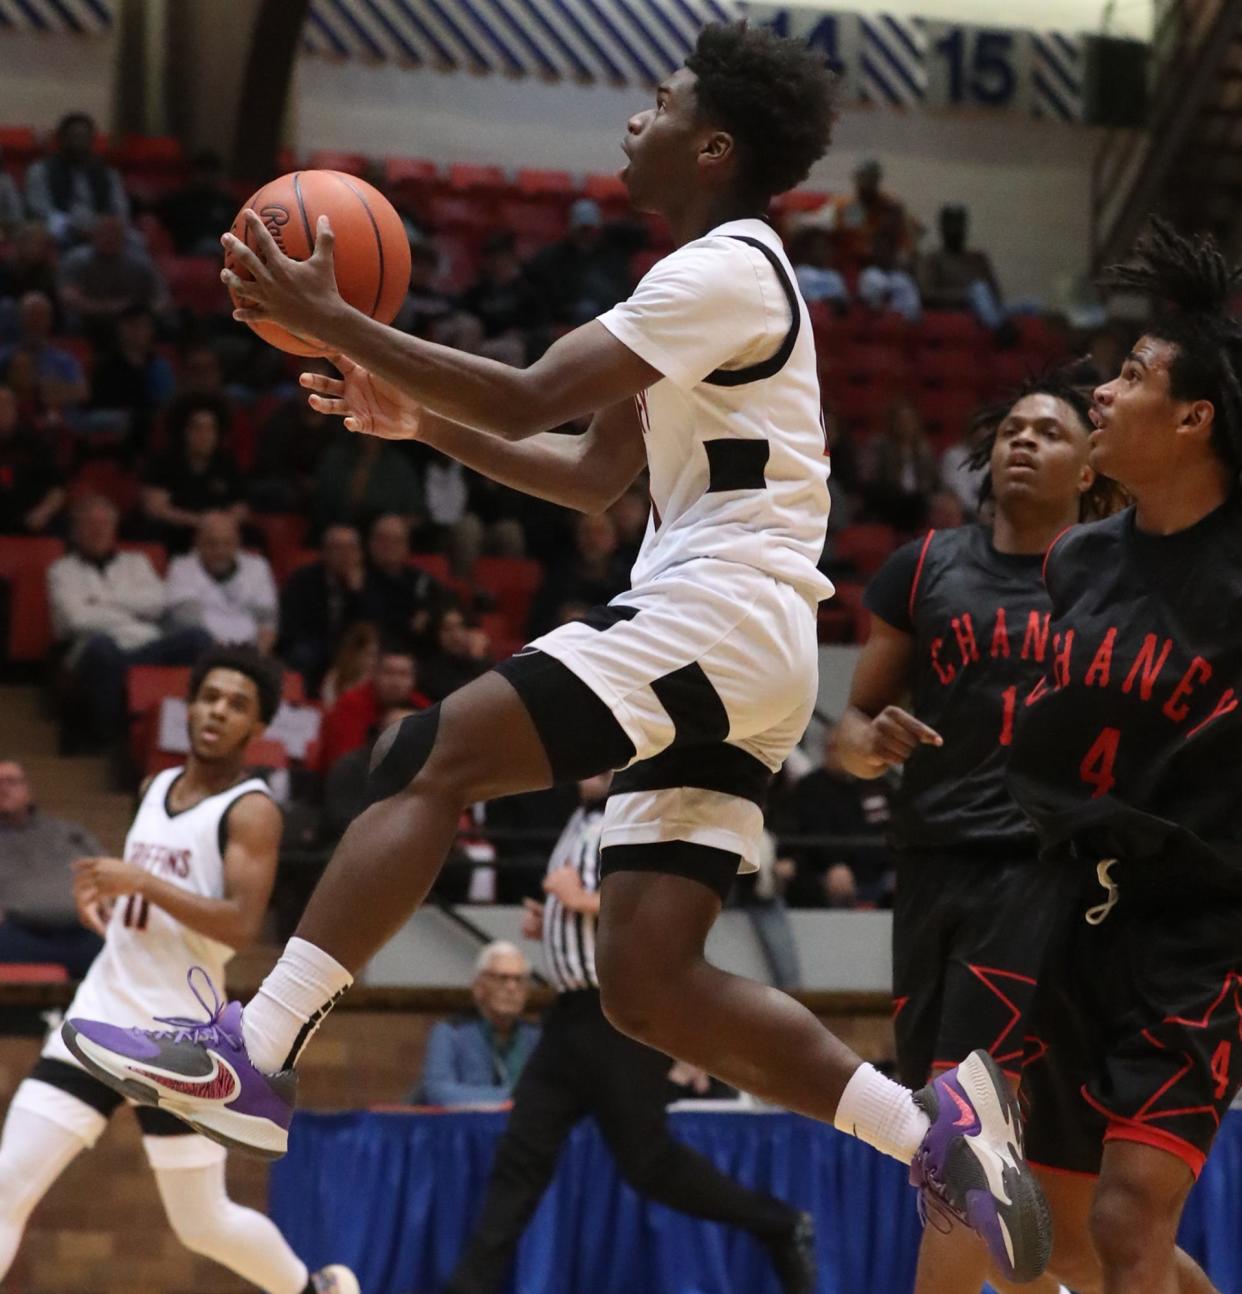 Buchtel's Qi'Marreon Marks goes to the hoop past Chaney's Jason Hewlett and Luis Febres during a Division II regional semifinal March 9 in Canton.